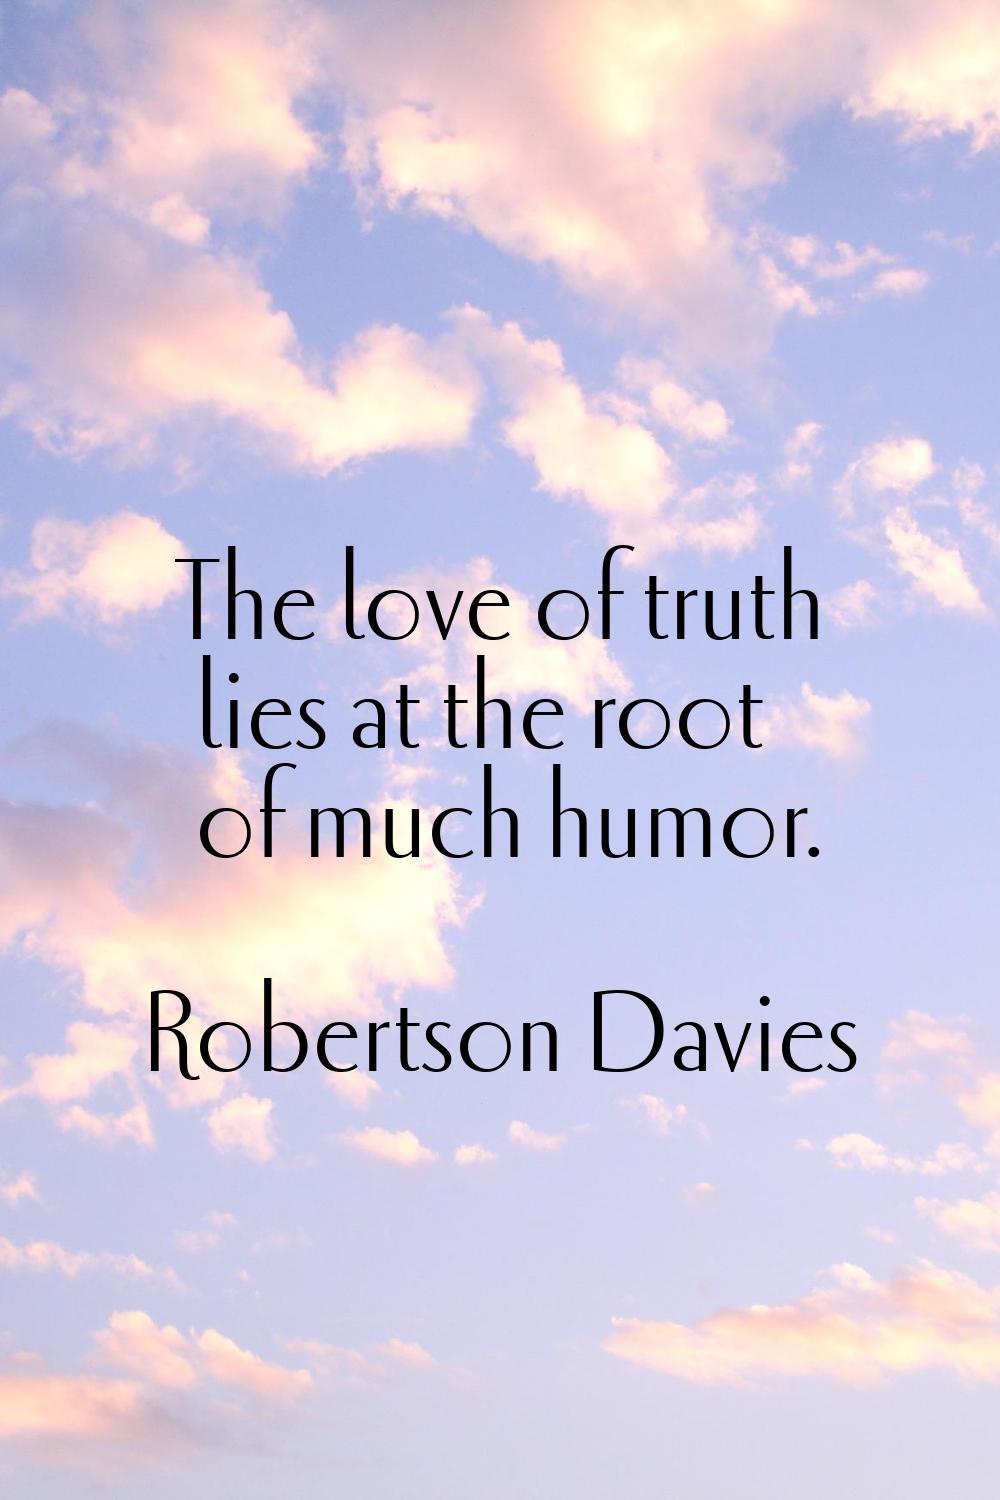 The love of truth lies at the root of much humor.